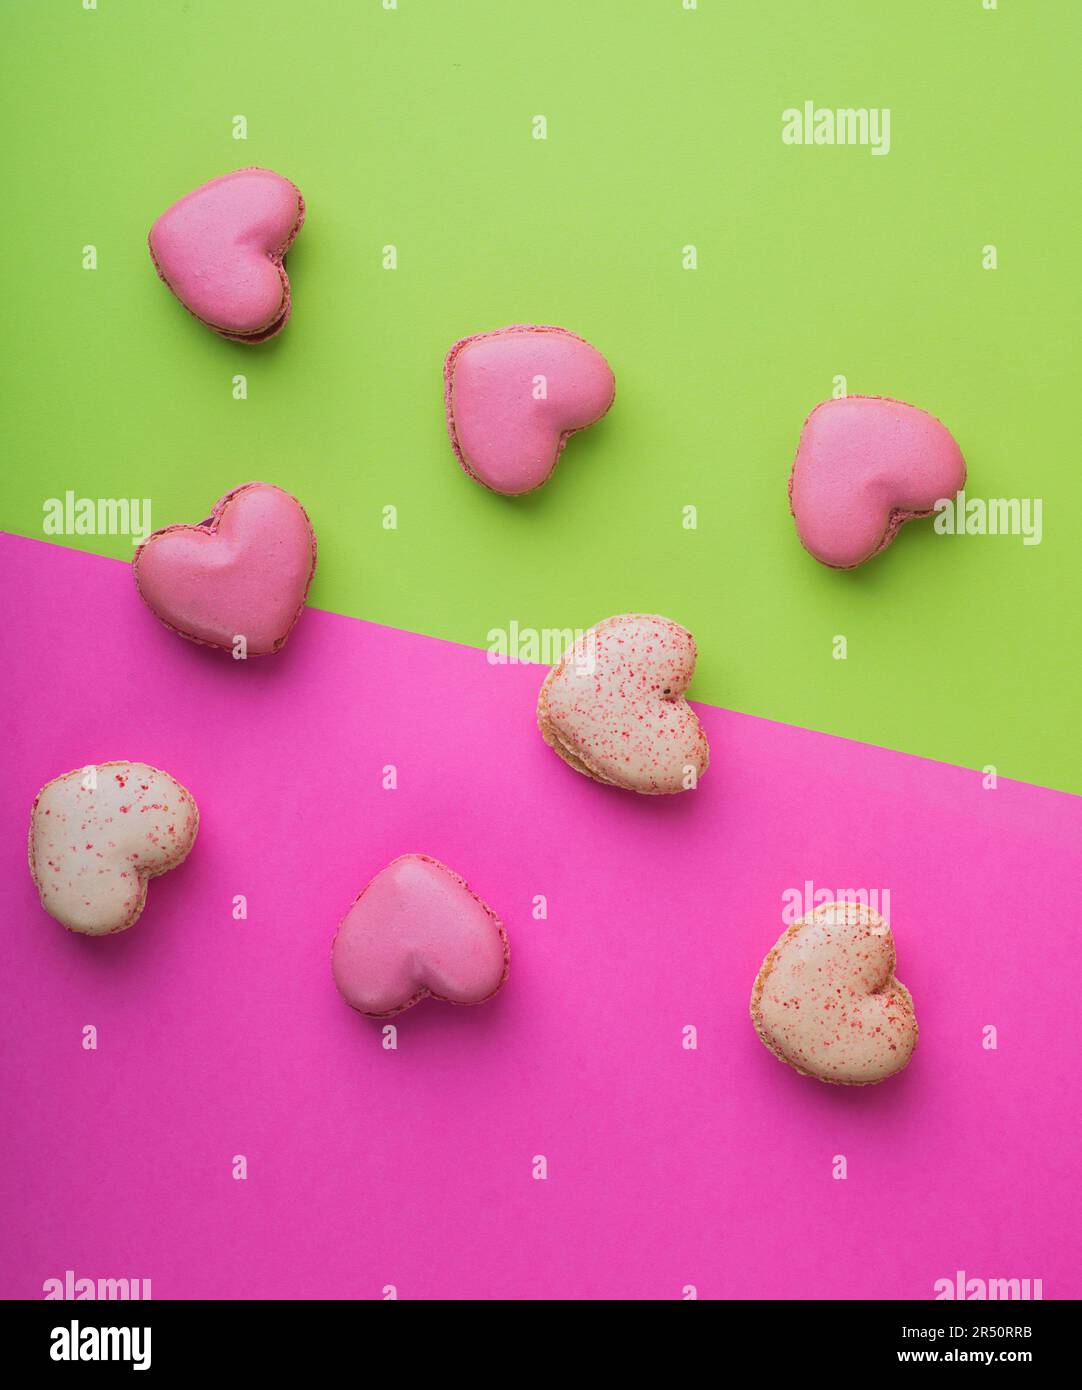 Heart-shaped macarons on a bright colored background Stock Photo